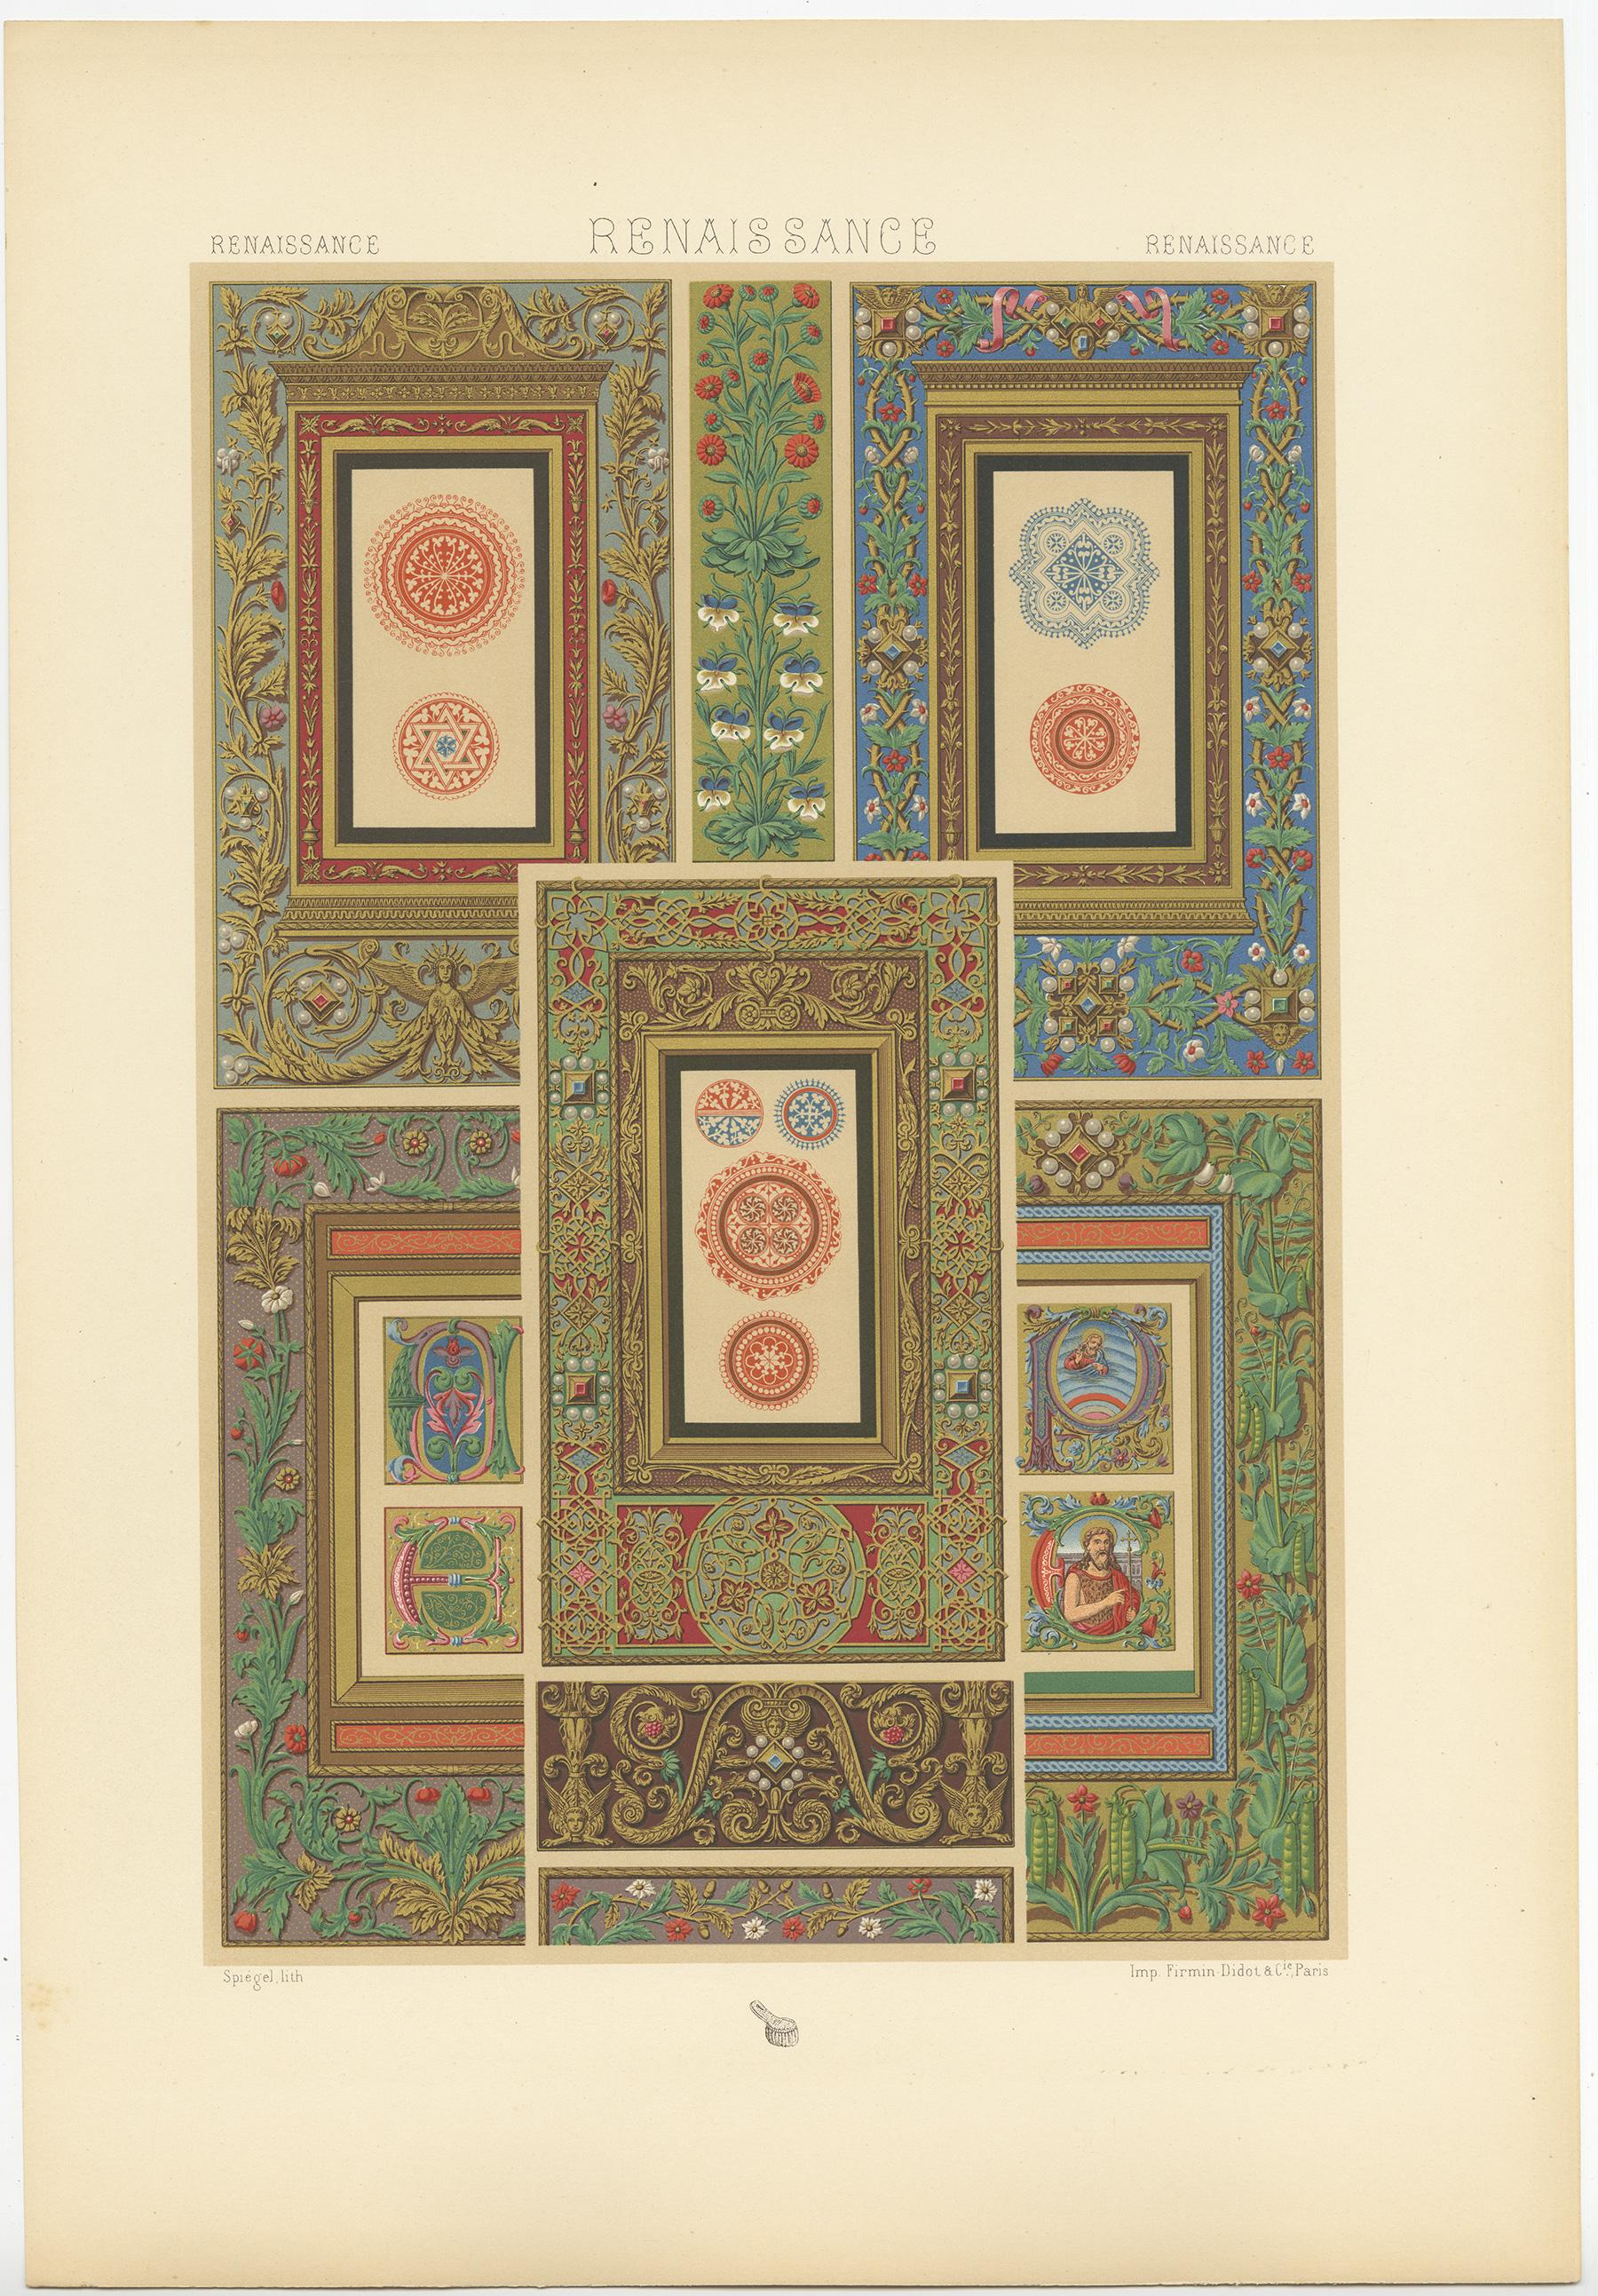 Antique print titled 'Renaissance - Renaissance - Renaissance'. Chromolithograph of from Italian and French manuscripts 15th and 16th centuries ornaments. This print originates from 'l'Ornement Polychrome' by Auguste Racinet. Published circa 1890.